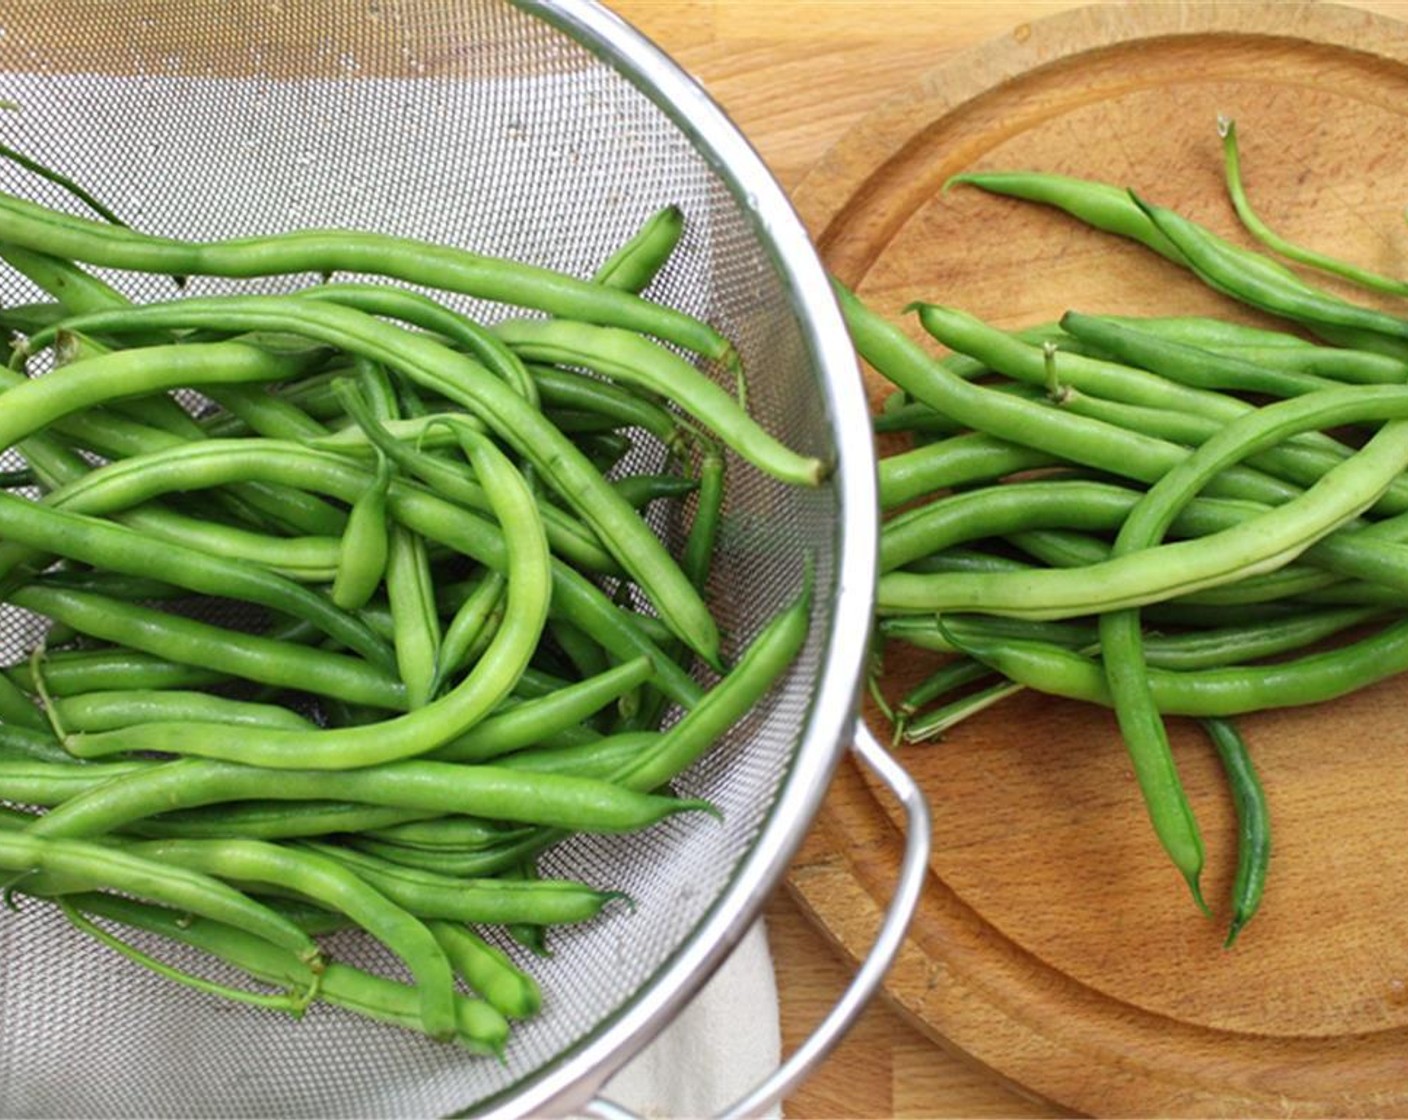 step 1 Preheat the oven to 425 degrees F (220 degrees C). Remove the stems of Green Beans (6 cups) and season them with Olive Oil (1 tsp), Salt (to taste), and Ground Black Pepper (to taste).